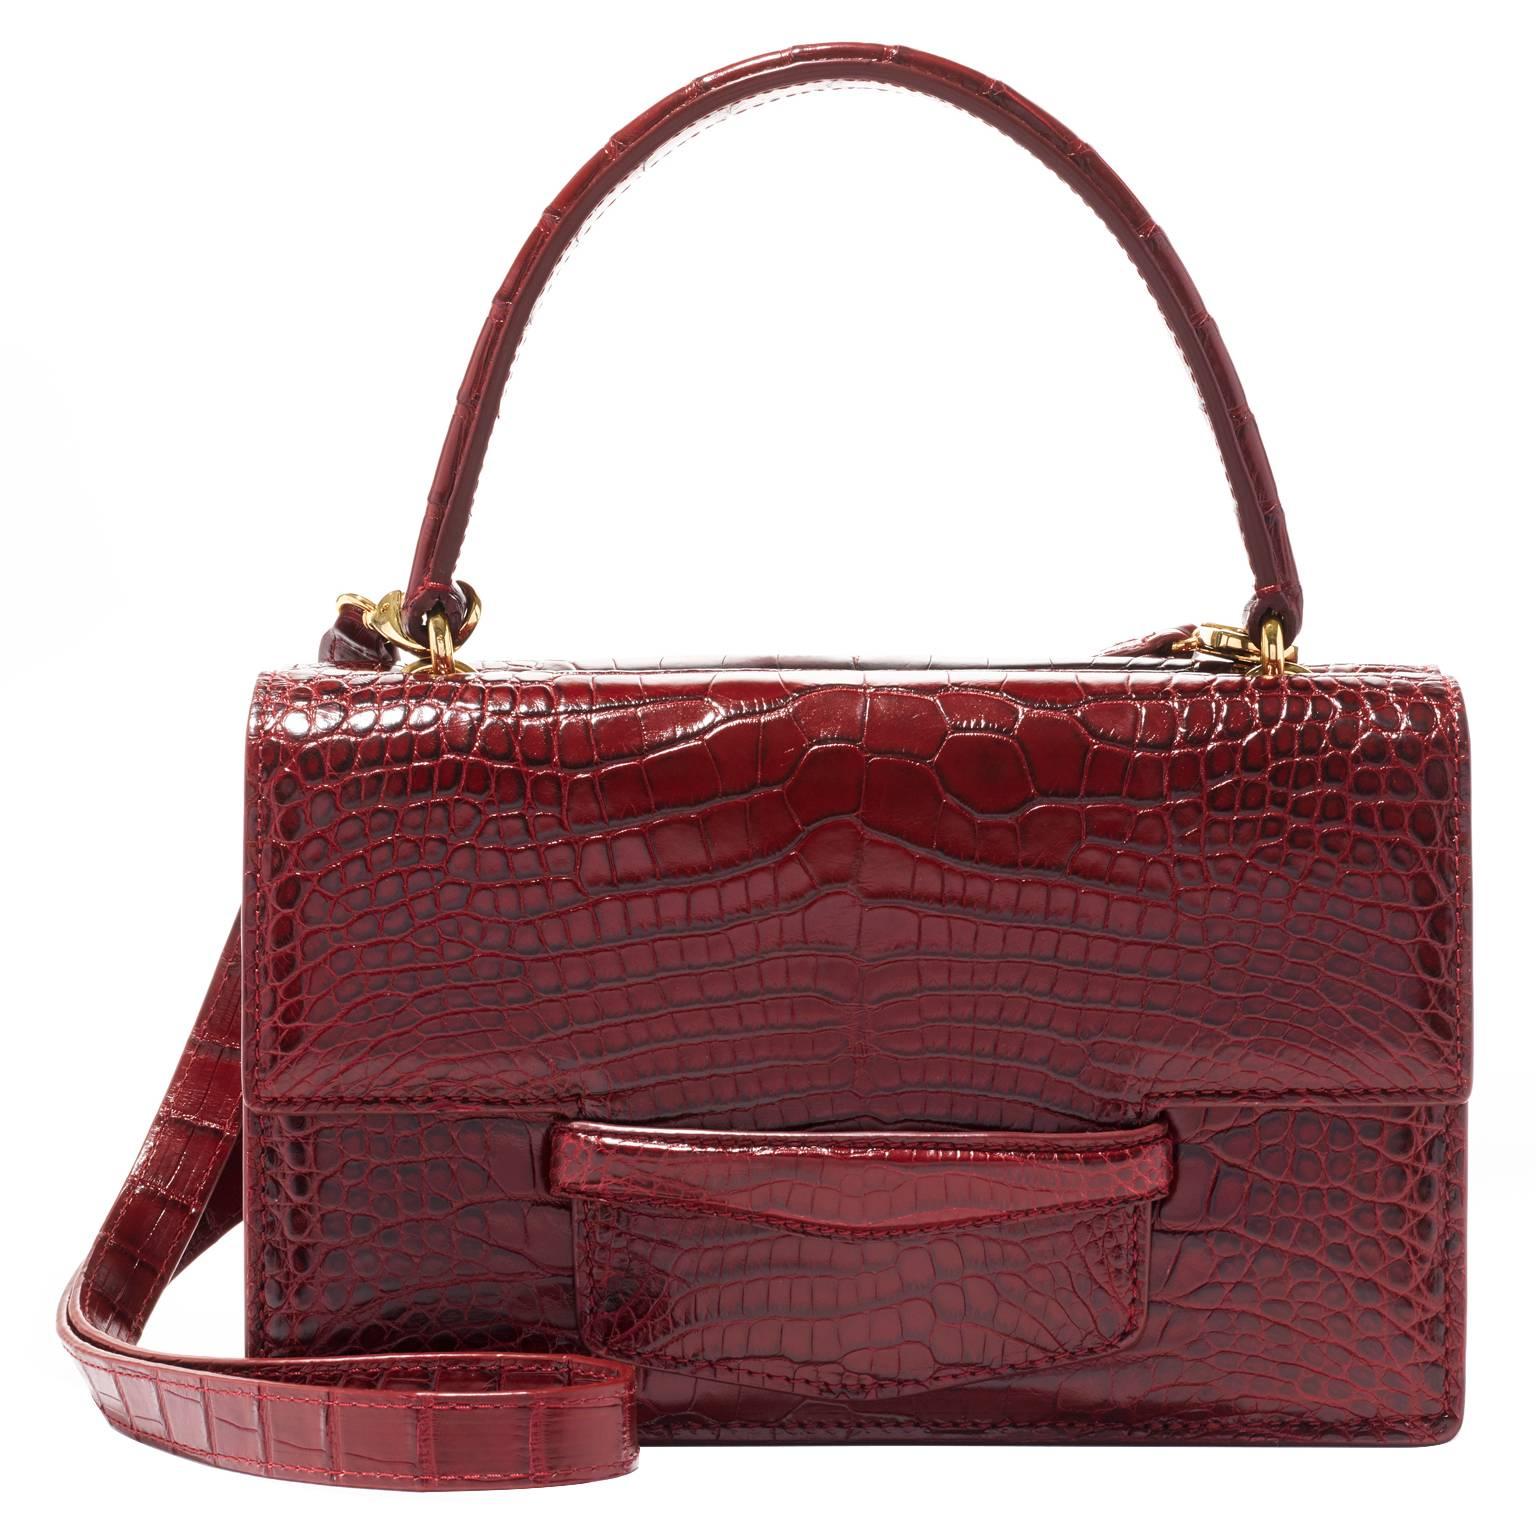 Lorry Newhouse Crimson Alligator Double Bag   For Sale